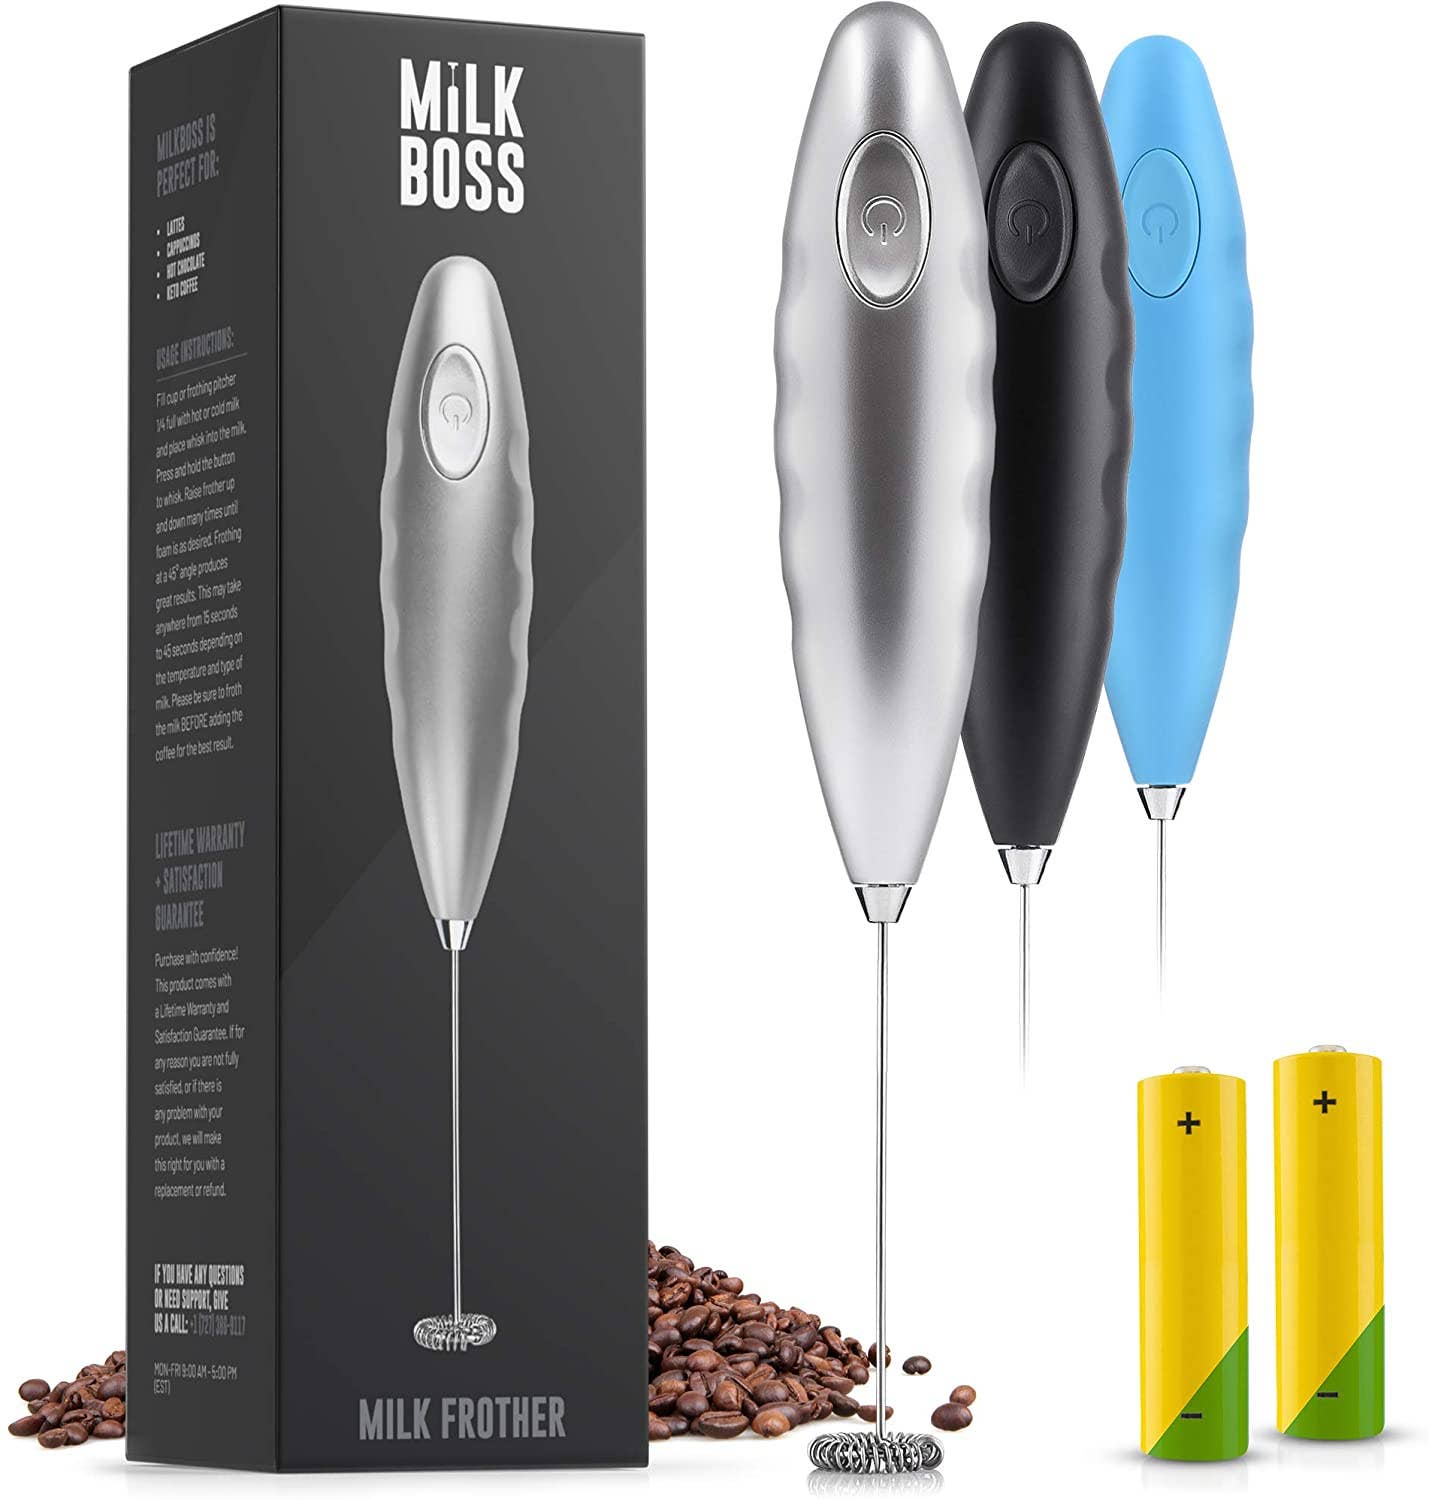 Milk Boss (Batteries Included) Double Grip Milk Frother